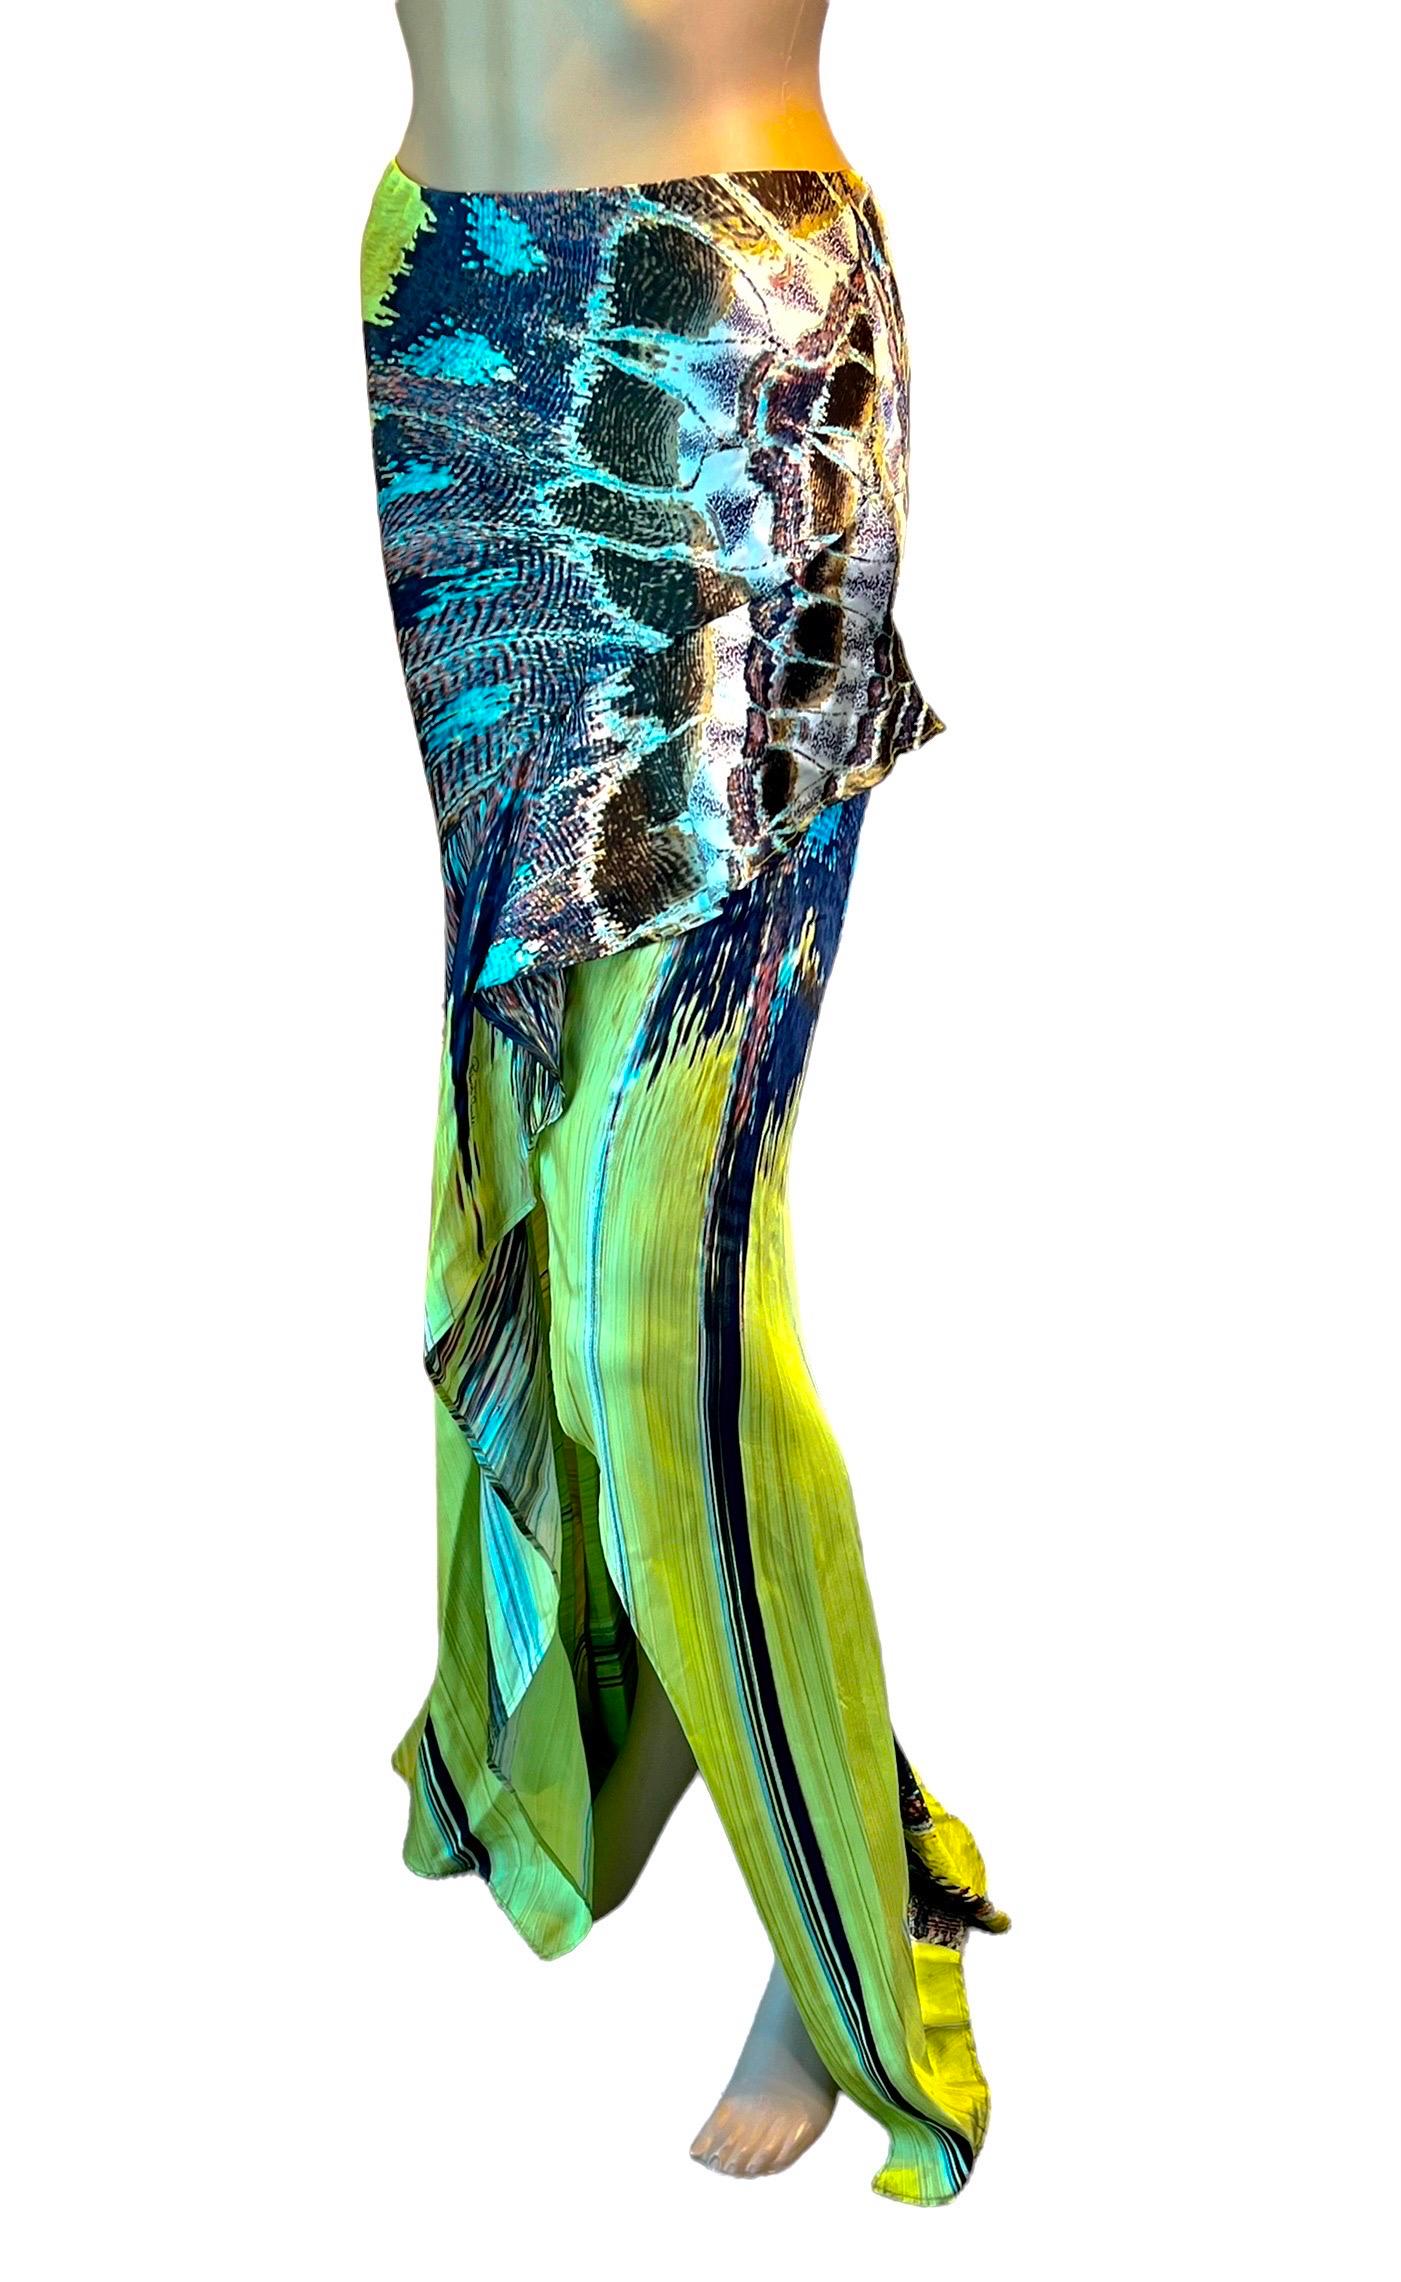 Roberto Cavalli S/S 2004 Asymmetric High-Low Feather Print Silk Train Maxi Skirt In Excellent Condition For Sale In Naples, FL